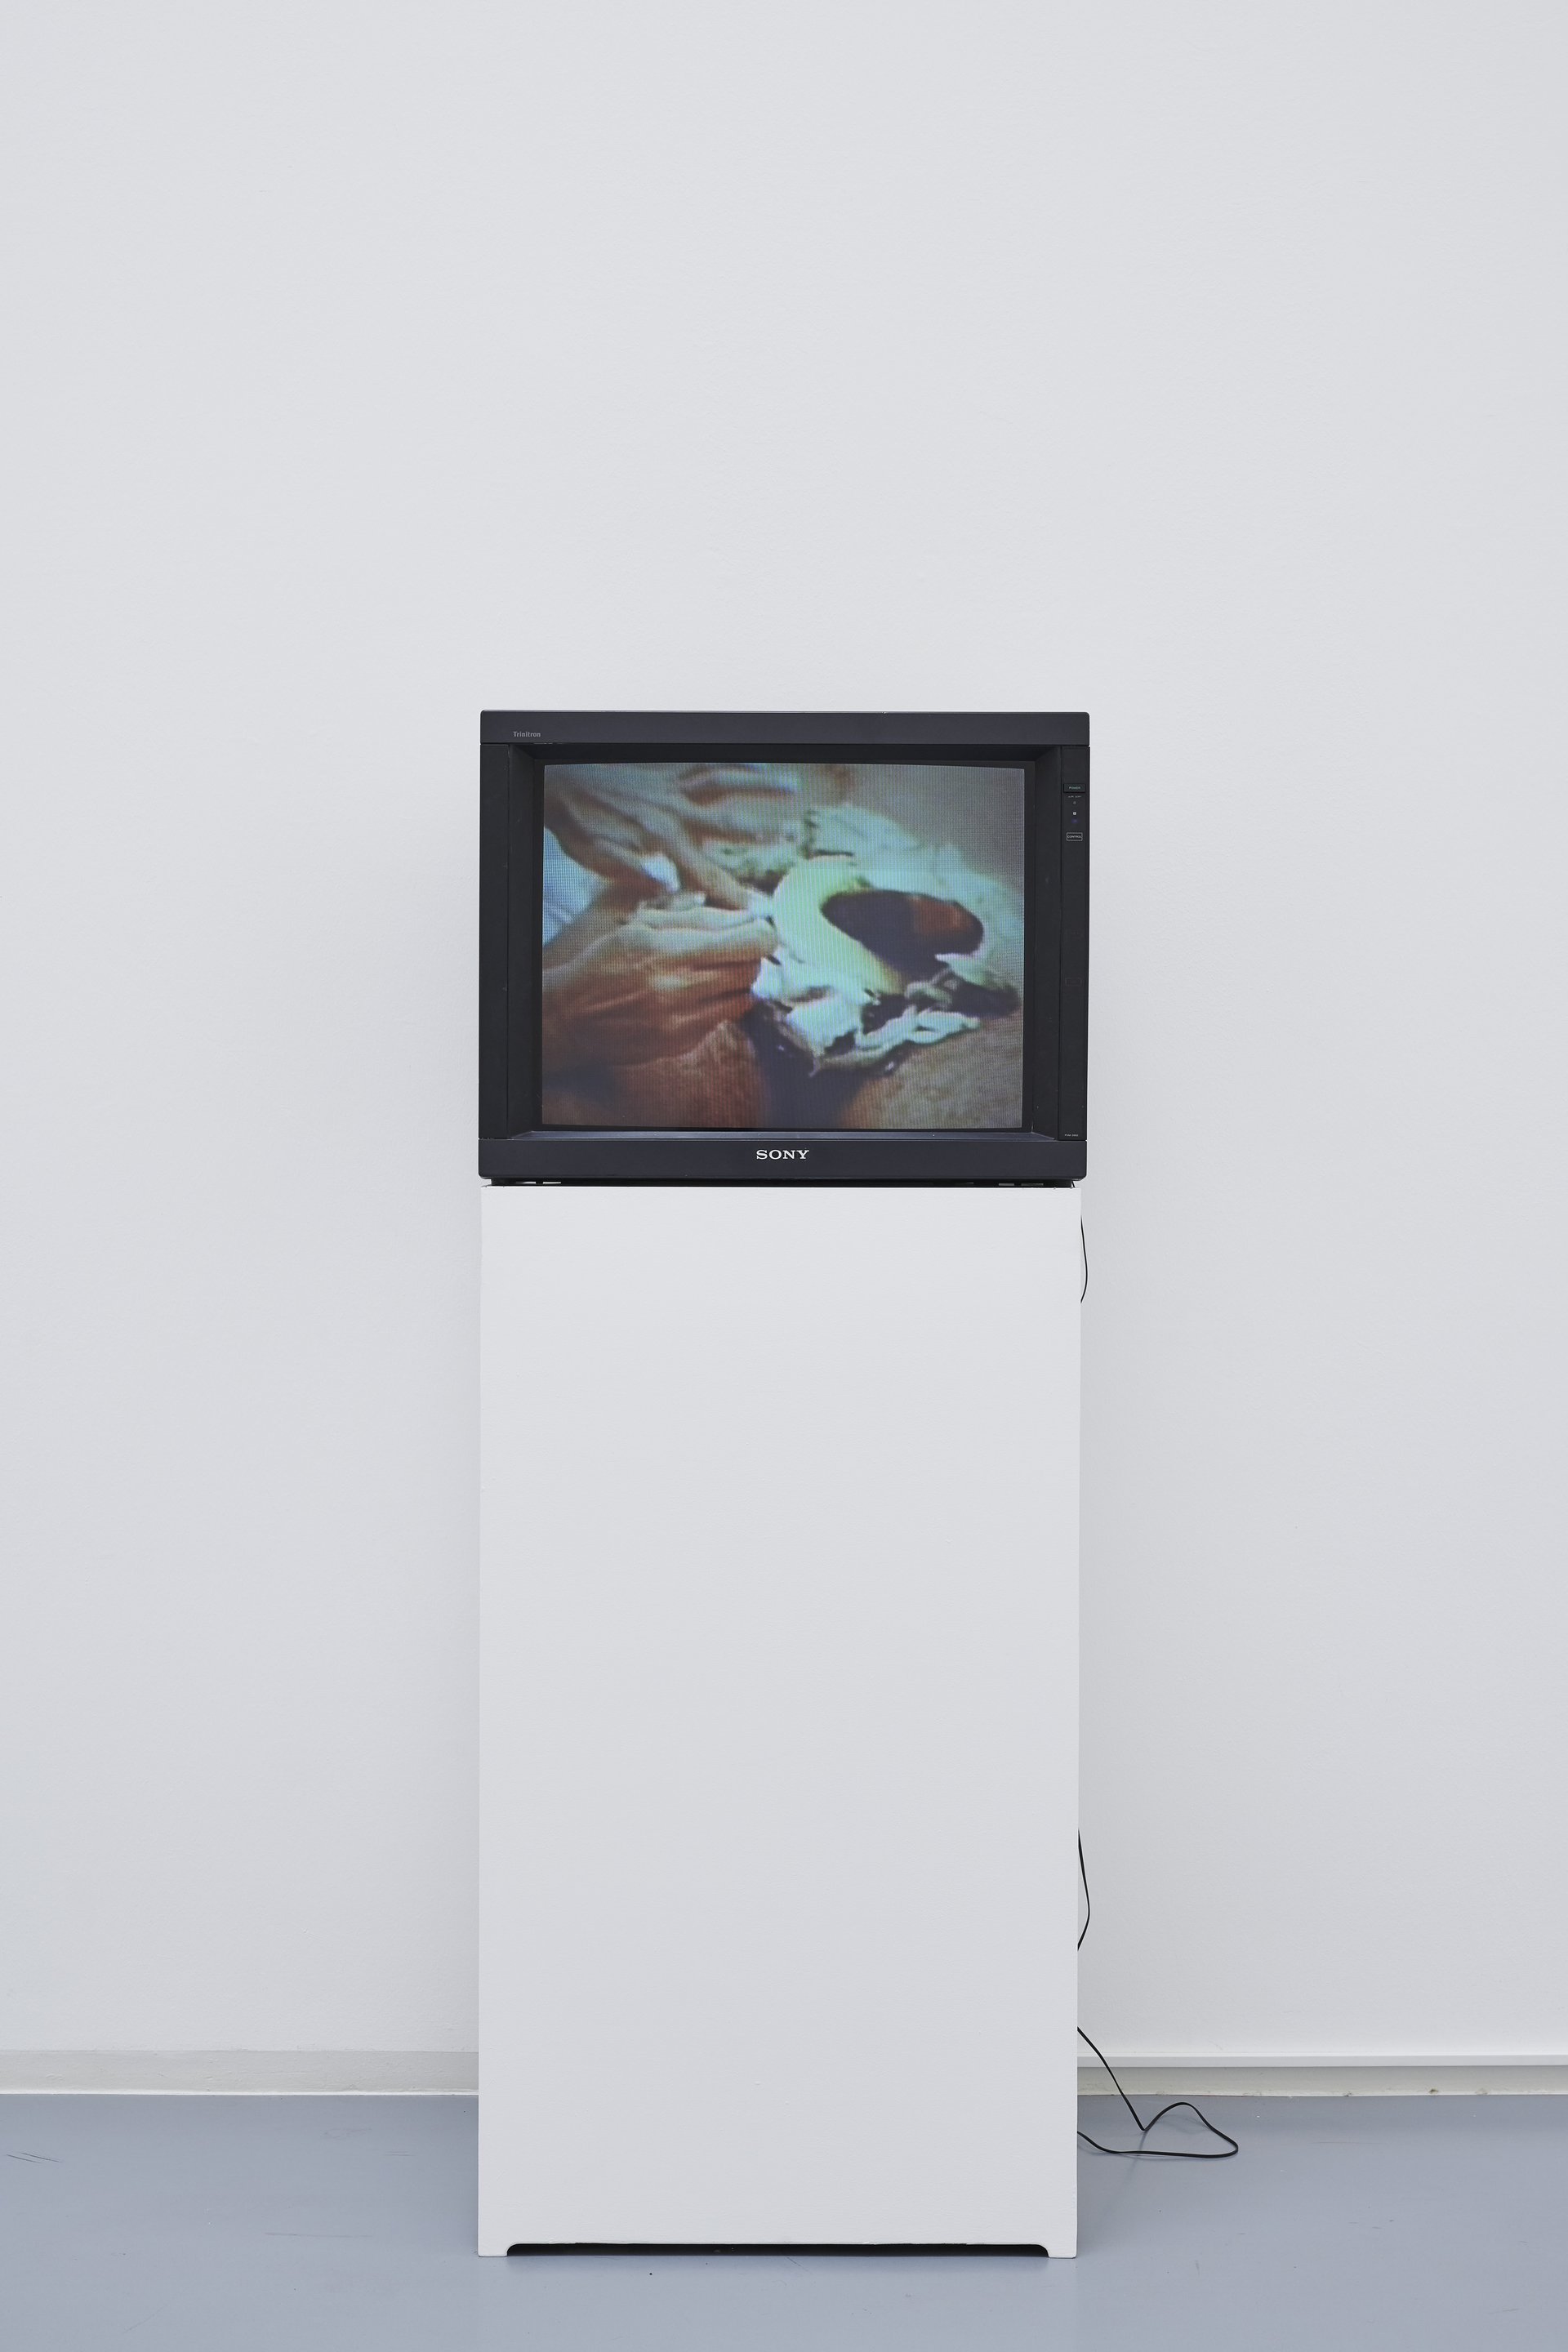 Eunice Golden, Blue Bananas and other Meats, 1973, video. Courtesy the artist. 